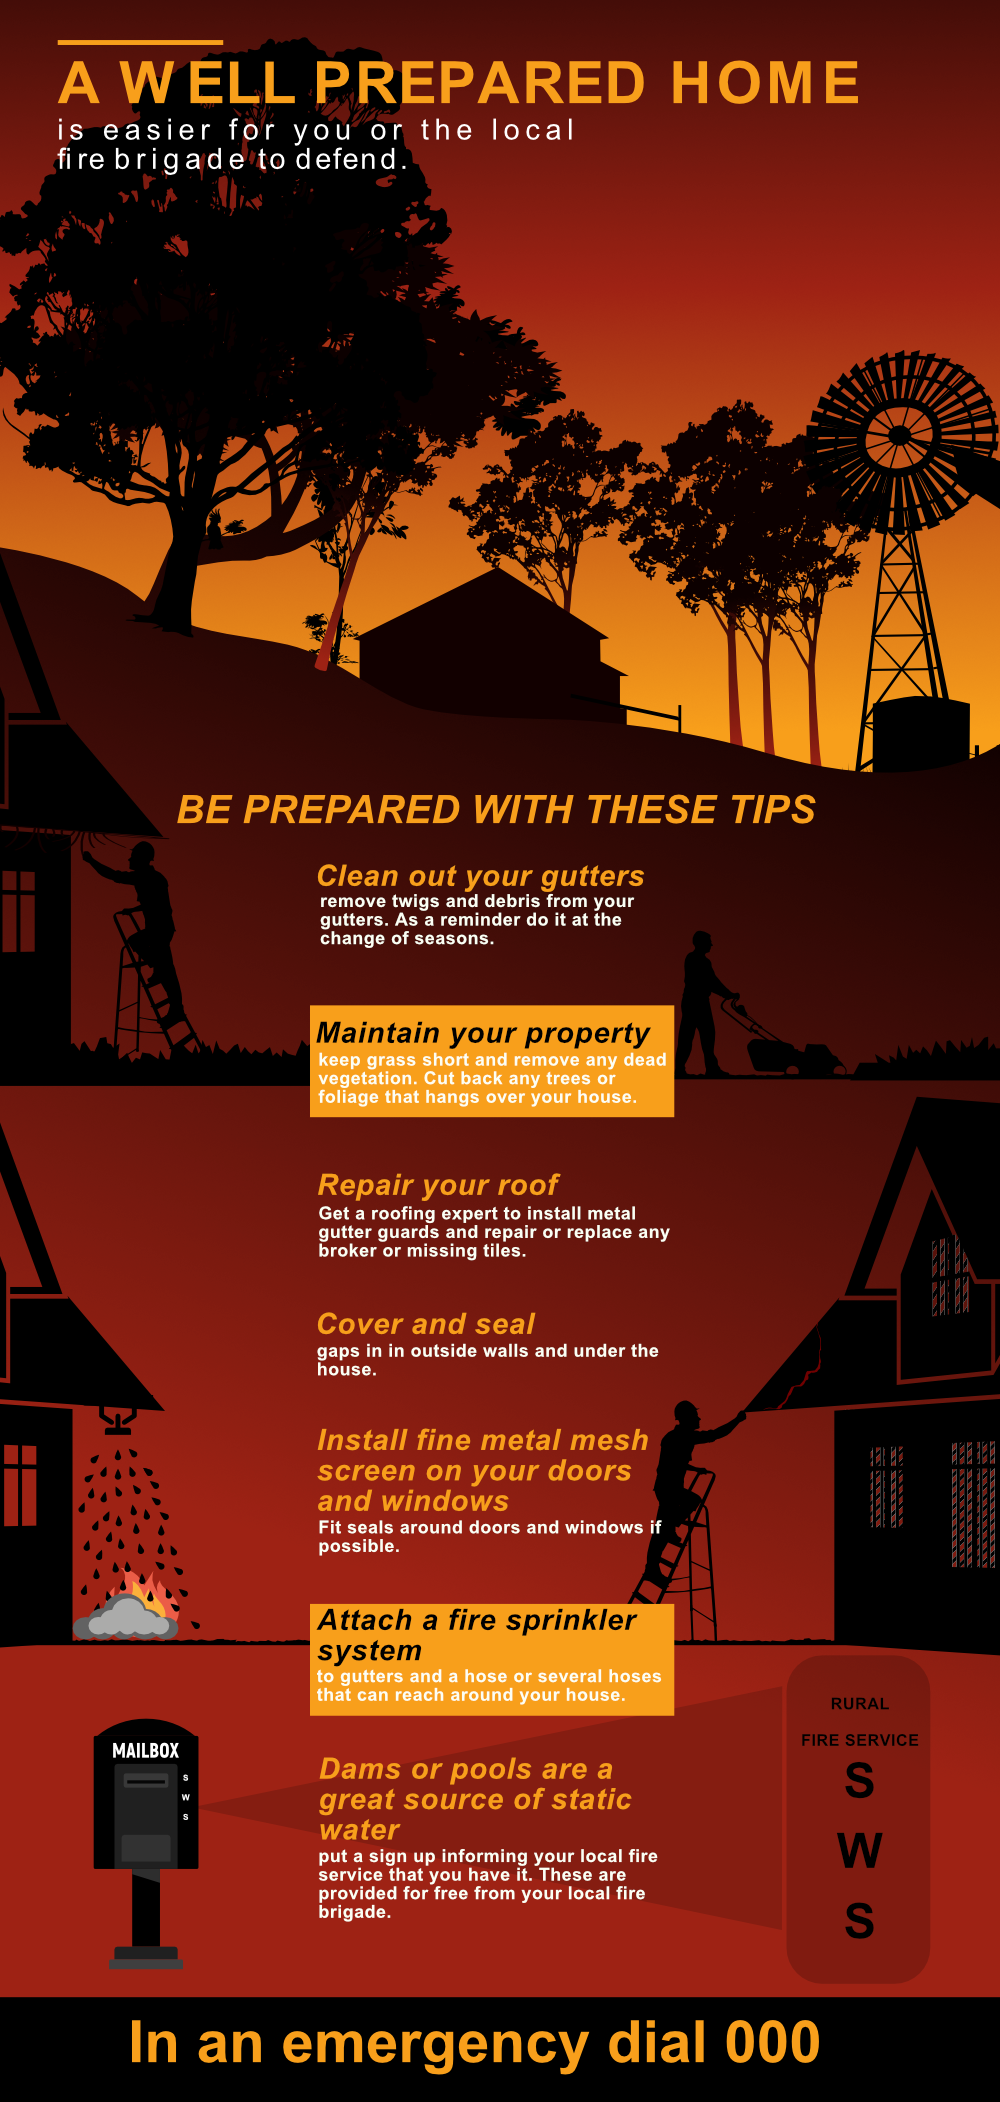 Fire Brigade To Defend Your Home – Be Prepared With These Tips